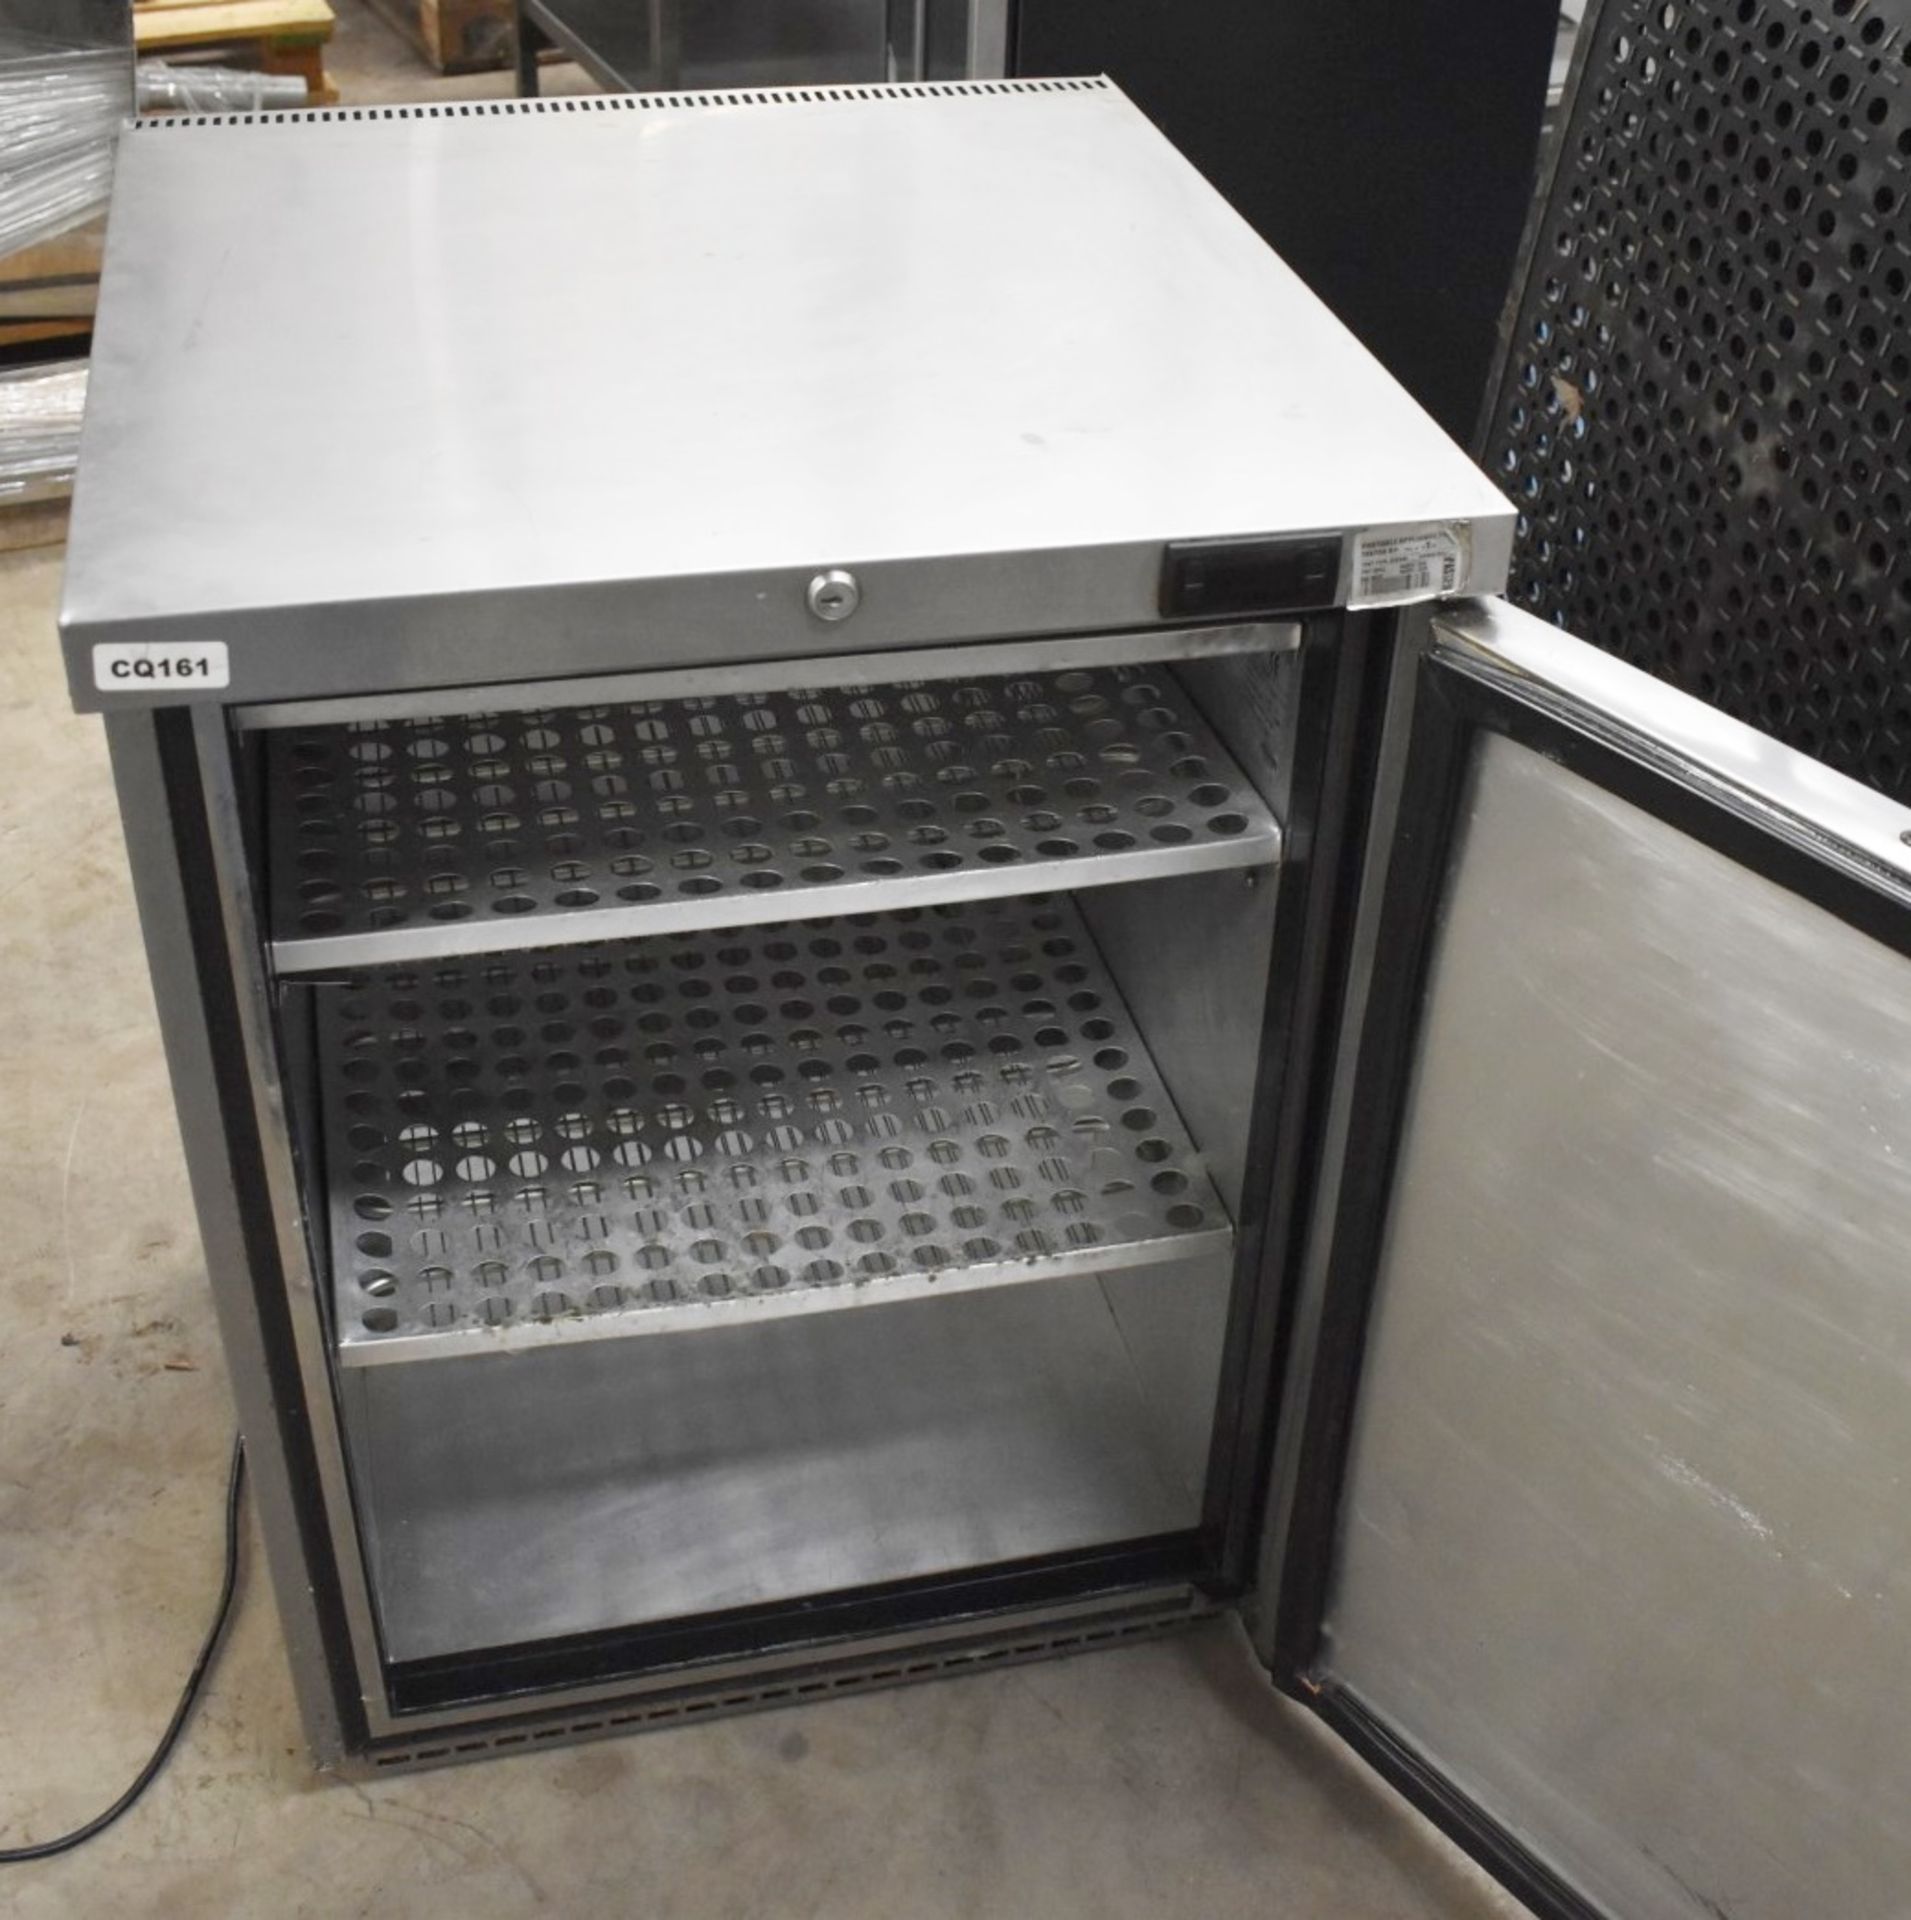 1 x Foster Undercounter Single Door Freezer With Stainless Steel Finish - H80 x W60 x D65 cms - - Image 2 of 2